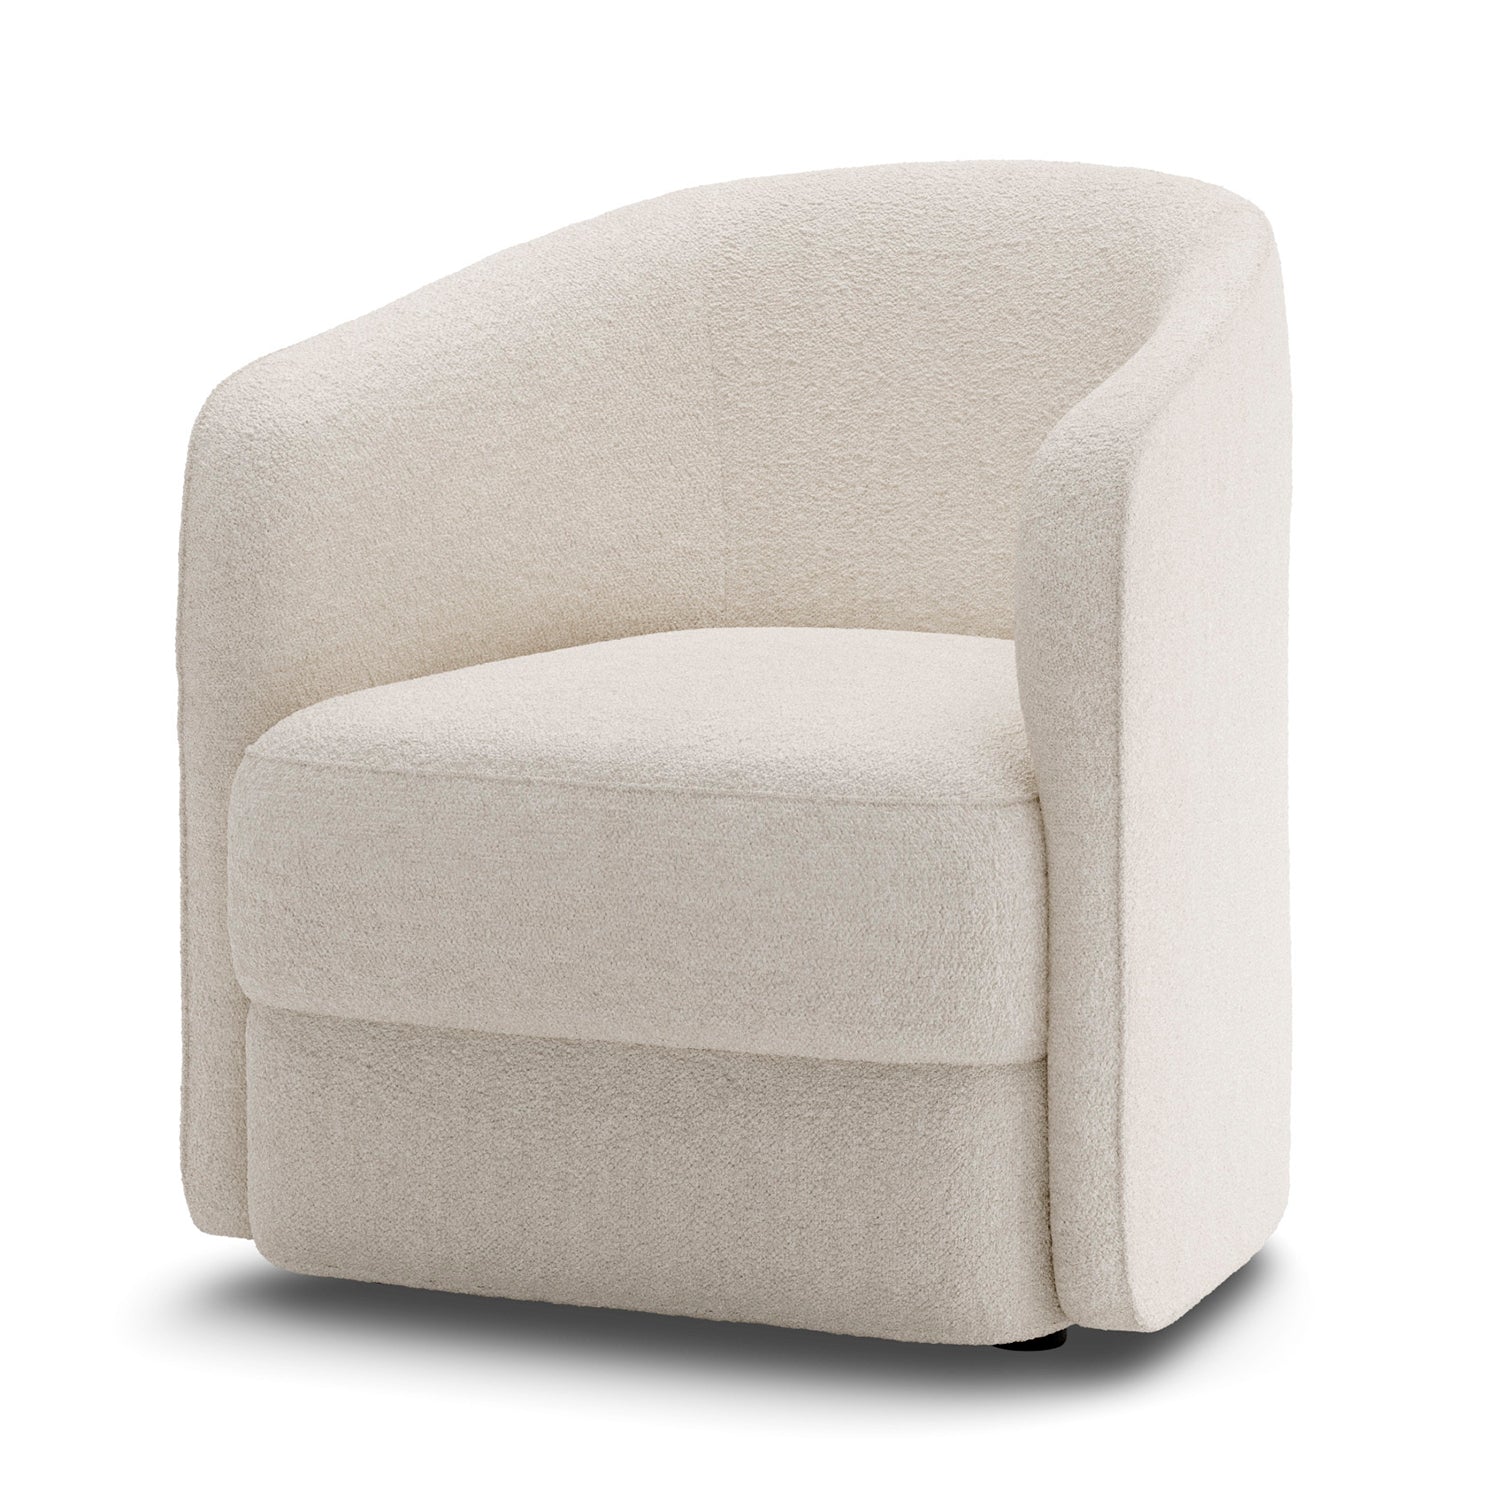 New Works Covent Lounge Chair Narrow in lana beige